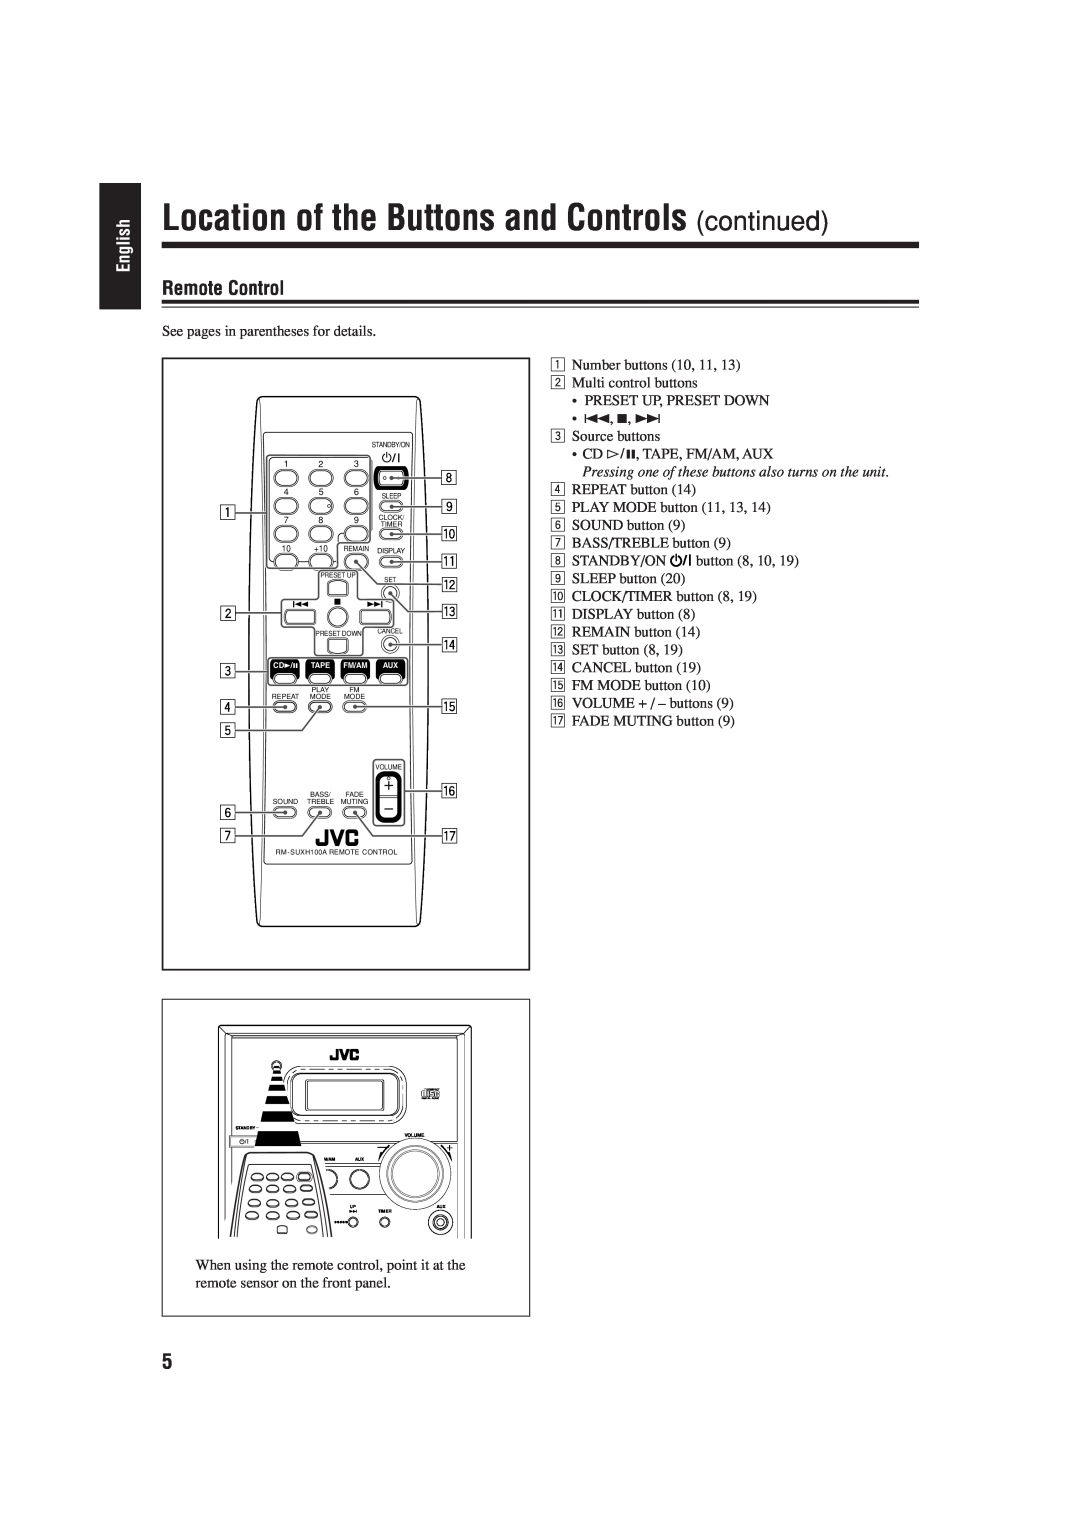 JVC CA-UXH100, UX-H100, SP-UXH100 manual Location of the Buttons and Controls continued, Remote Control, English 